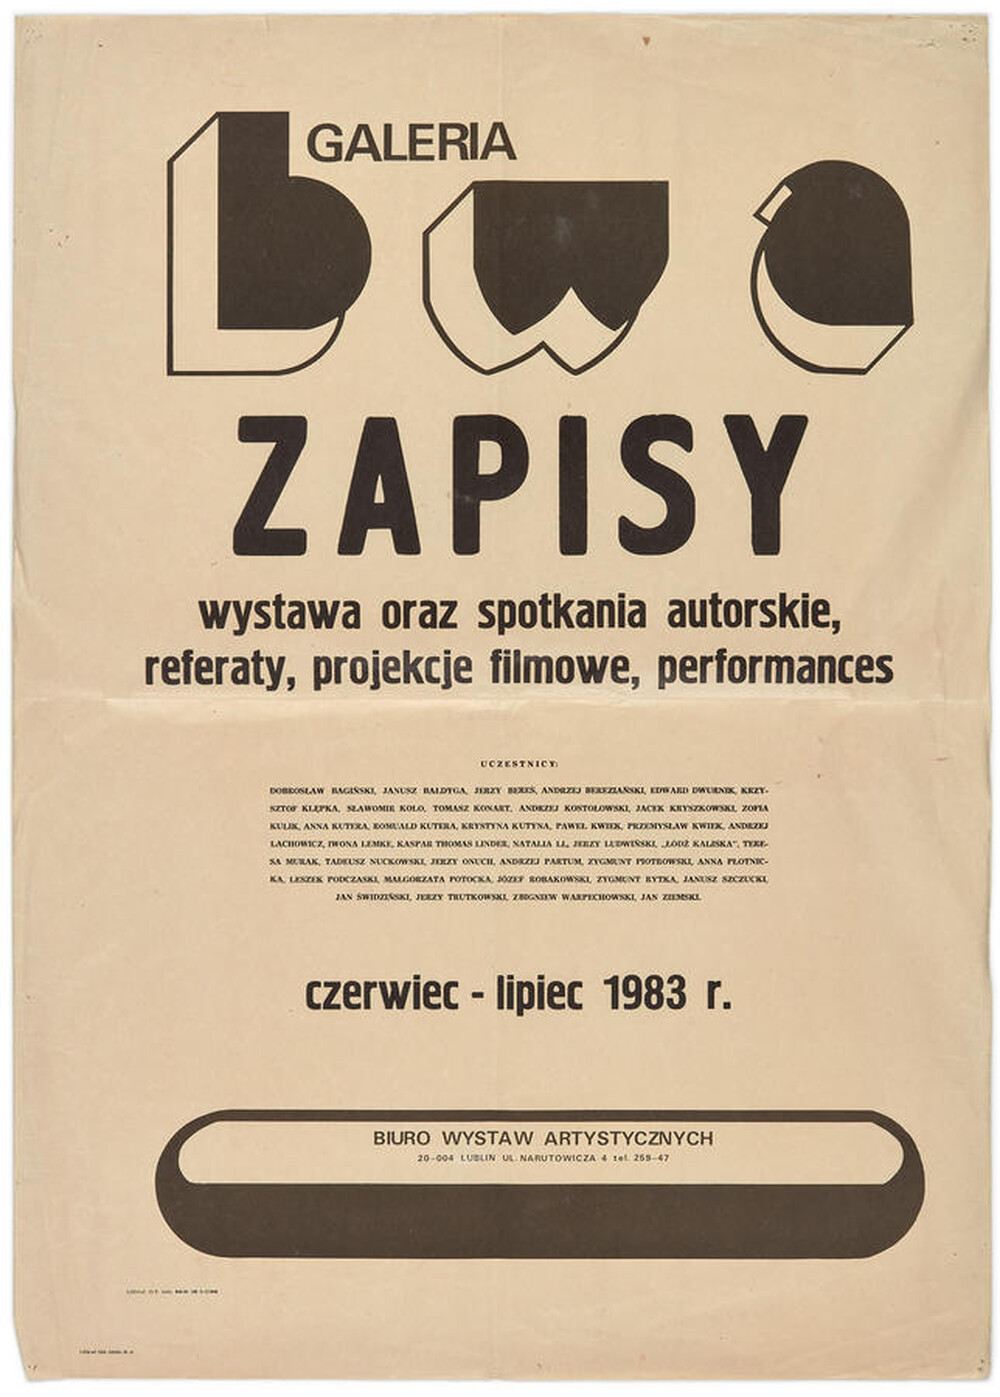 Poster advertising the artistic event "Records"